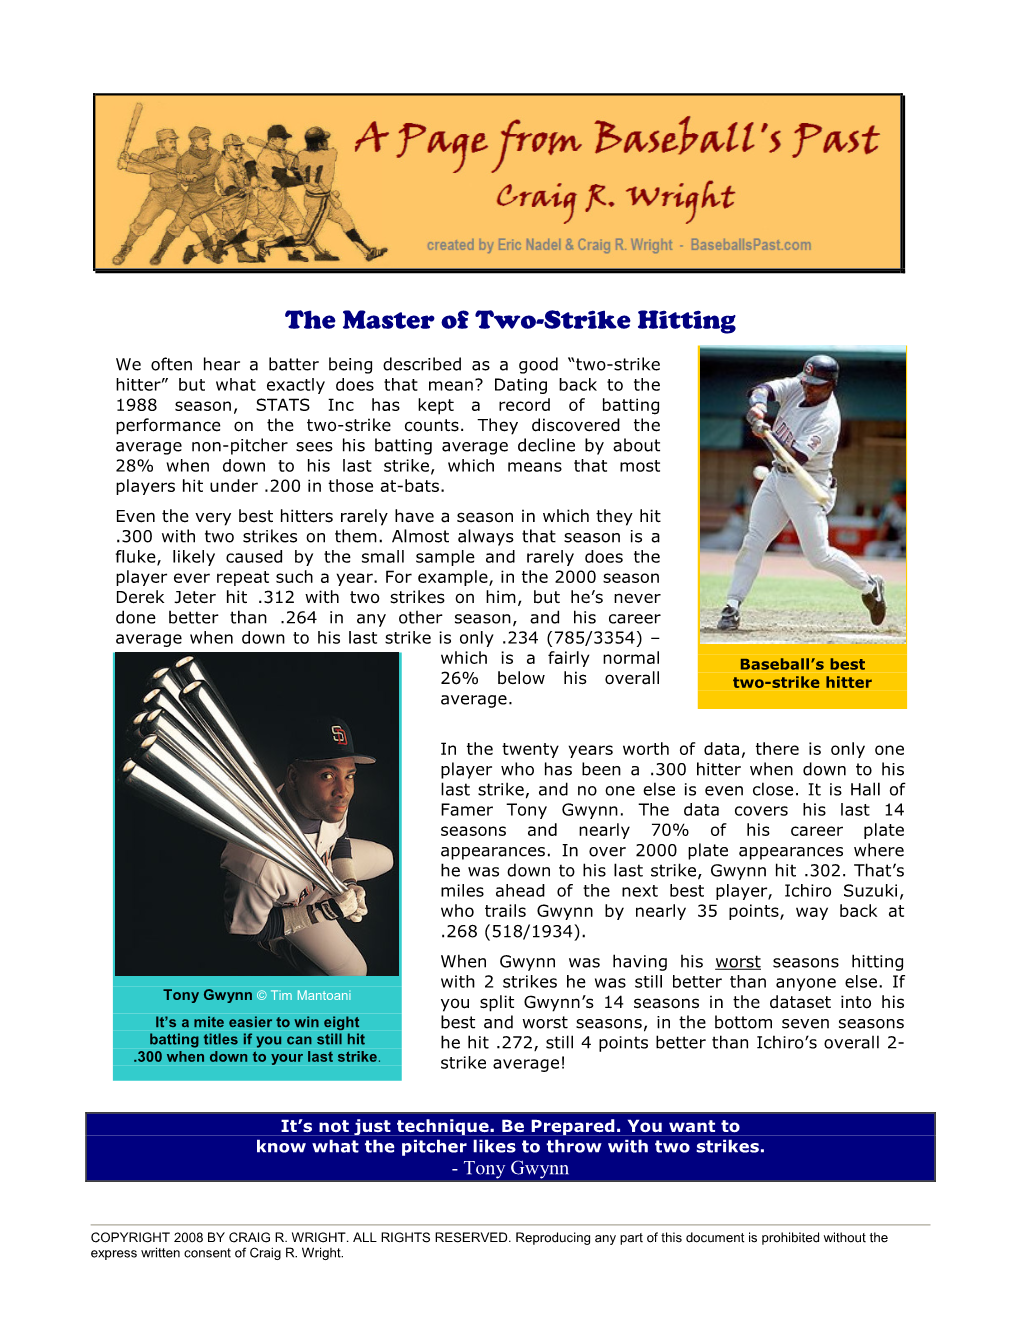 The Master of Two-Strike Hitting